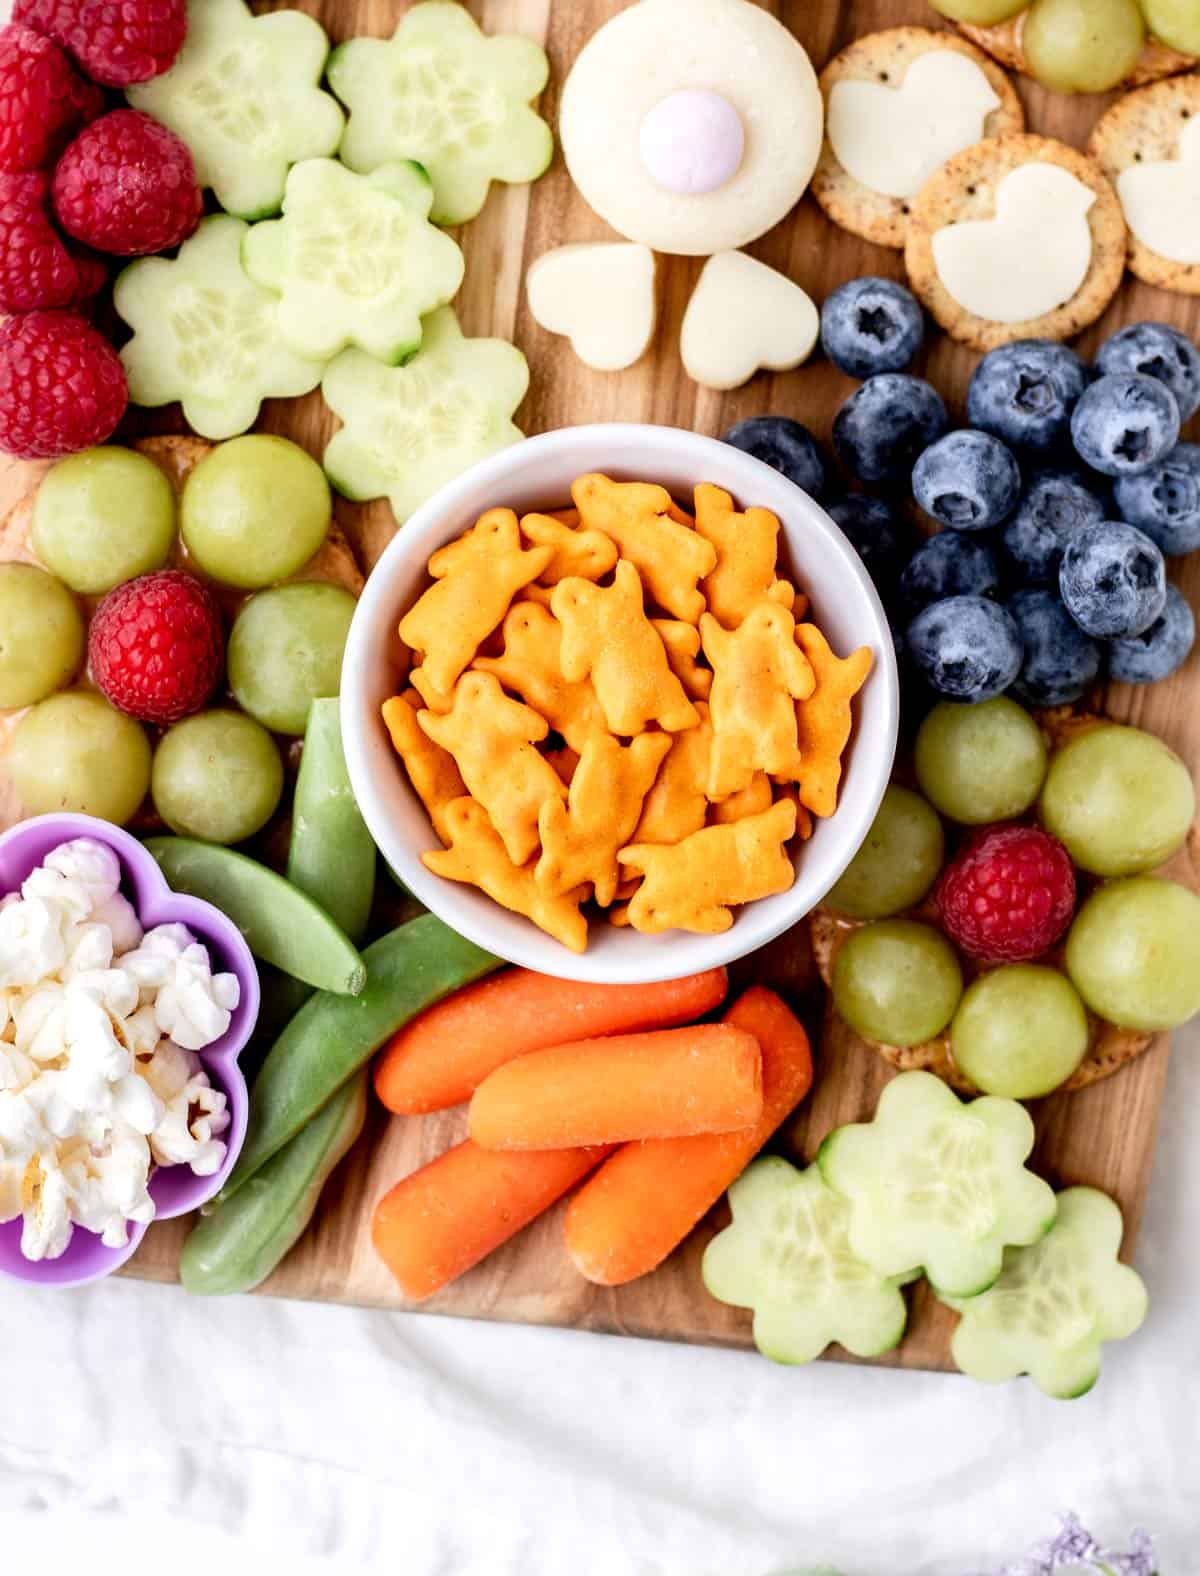 A close-up of the Annie's bunny crackers in the center of the Easter bunny board, surrounded by grapes, carrots, and blueberries.